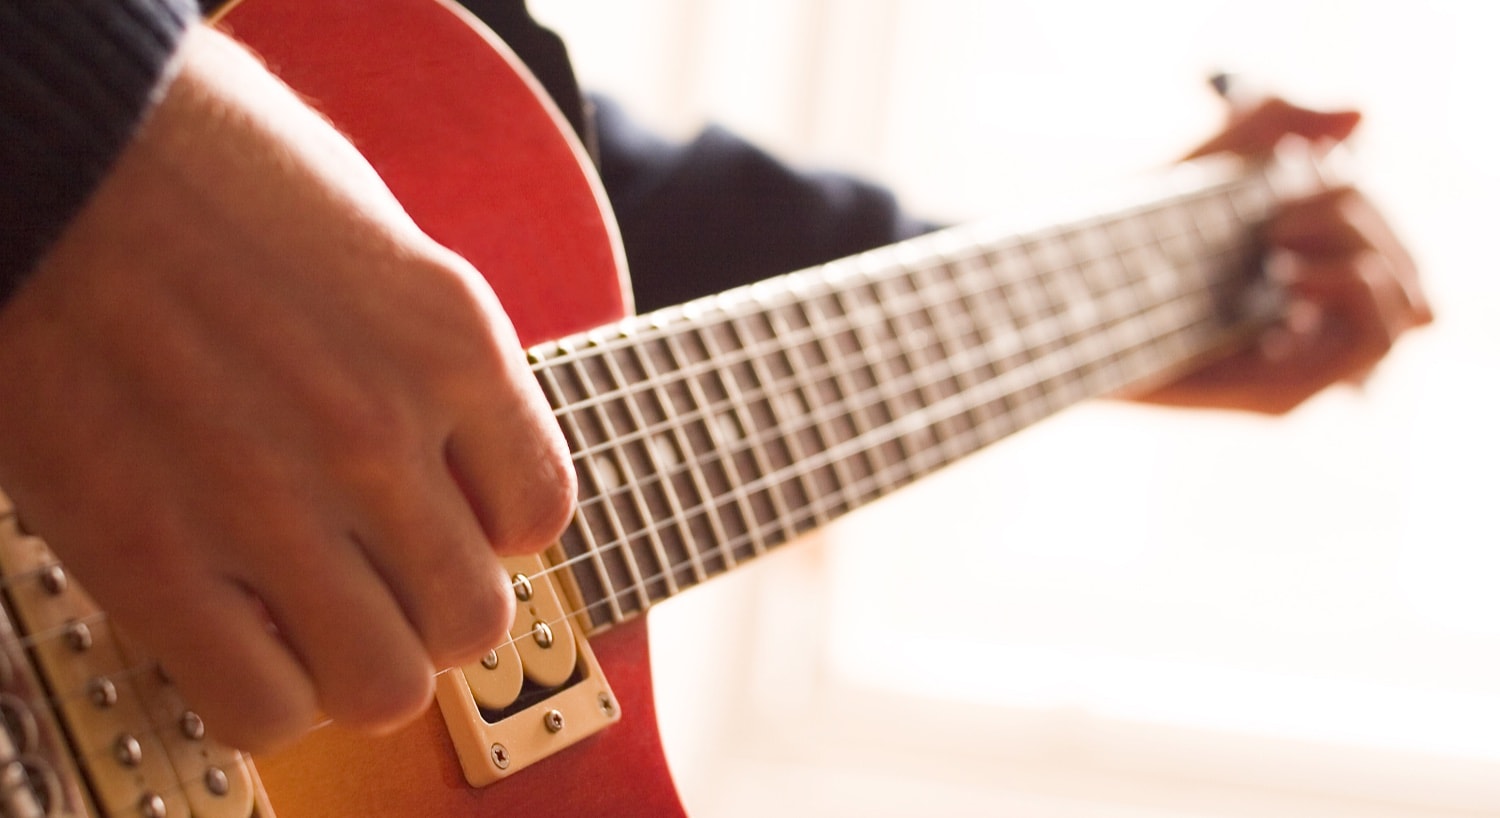 Close up view of a person playing a guitar